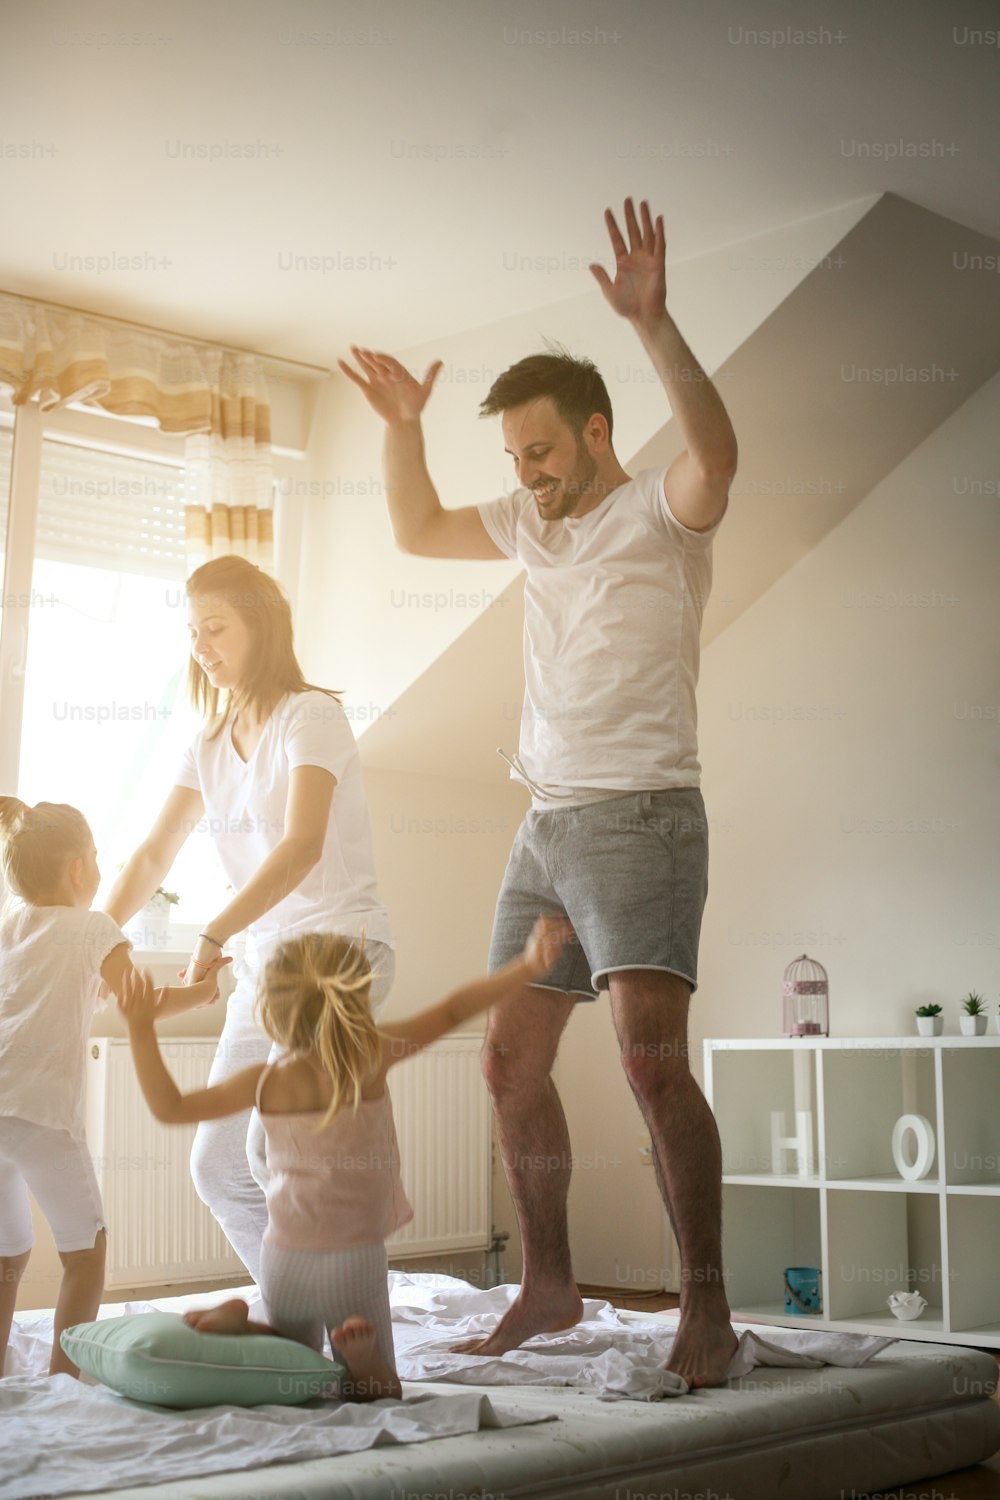 Family spending free time at home. Happy family jumping on bed together.